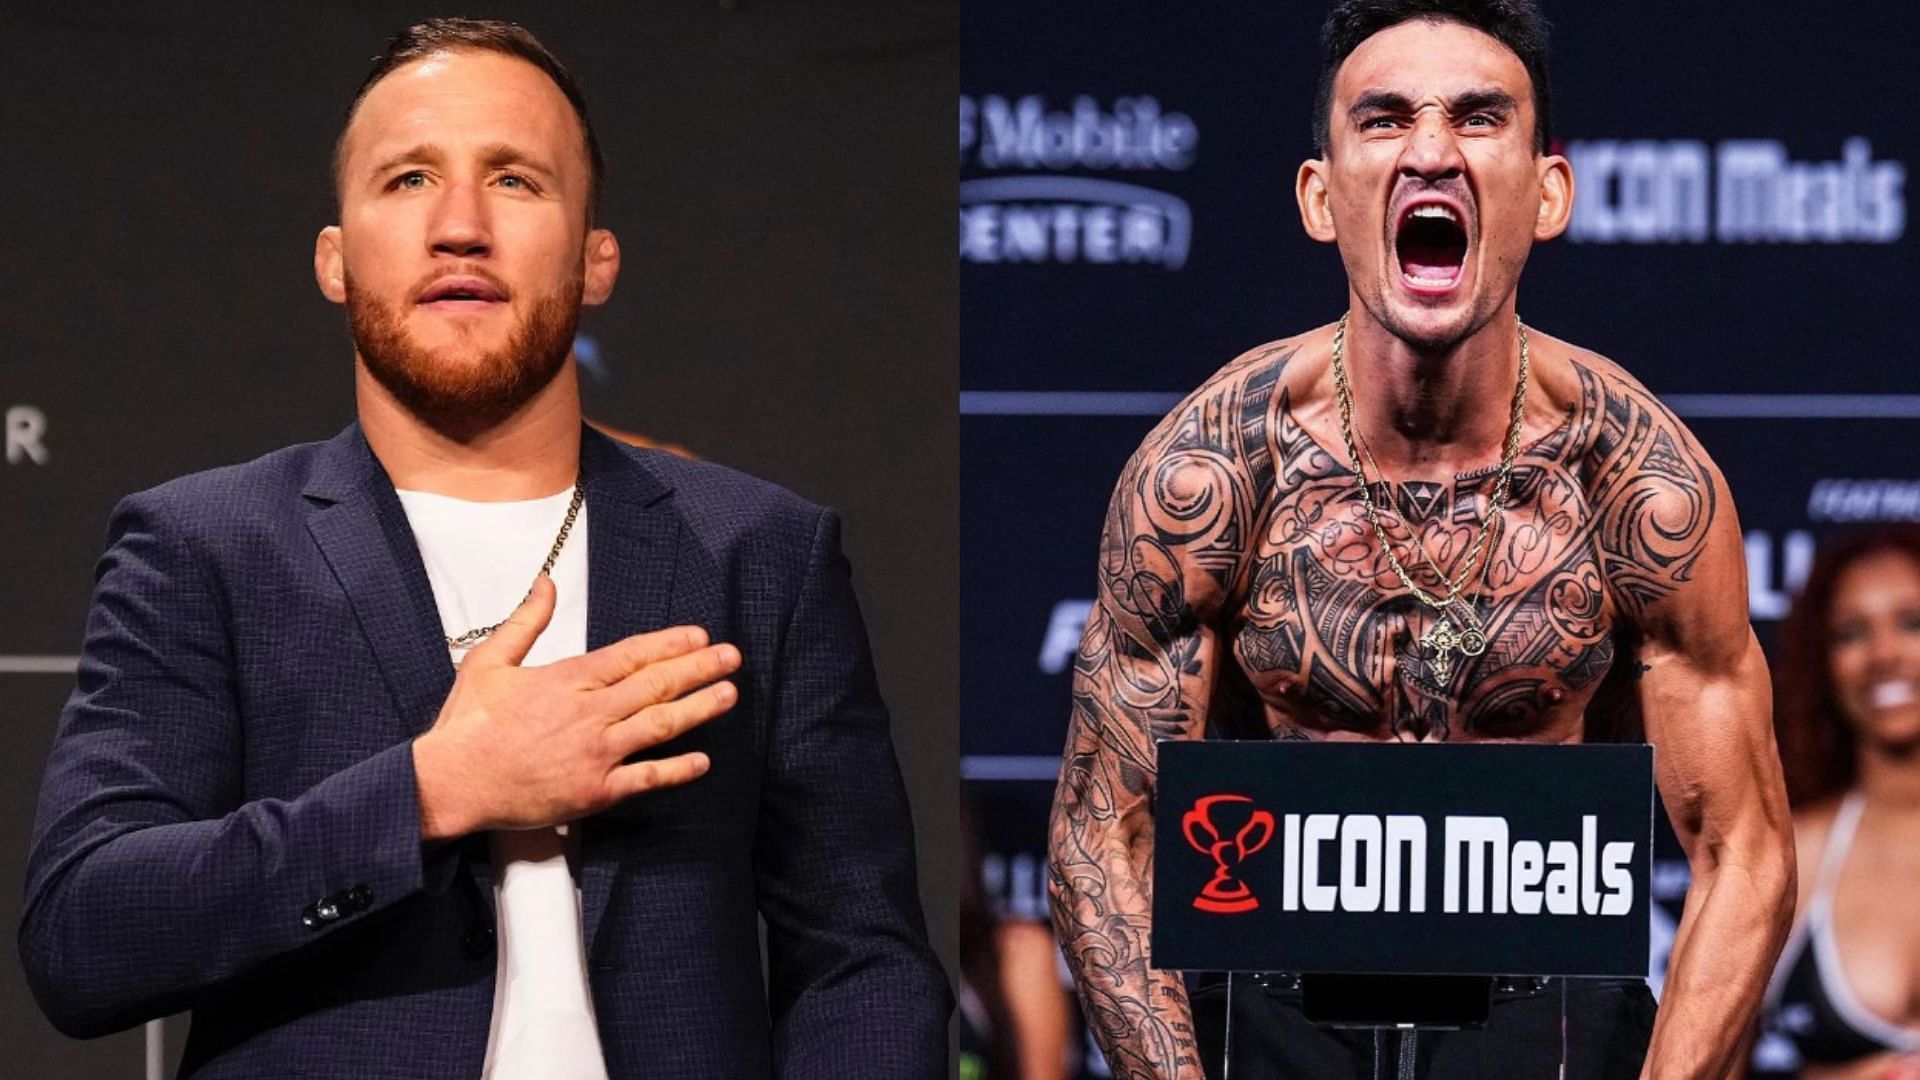 Justin Gaethje (left) weighs in on Max Holloway